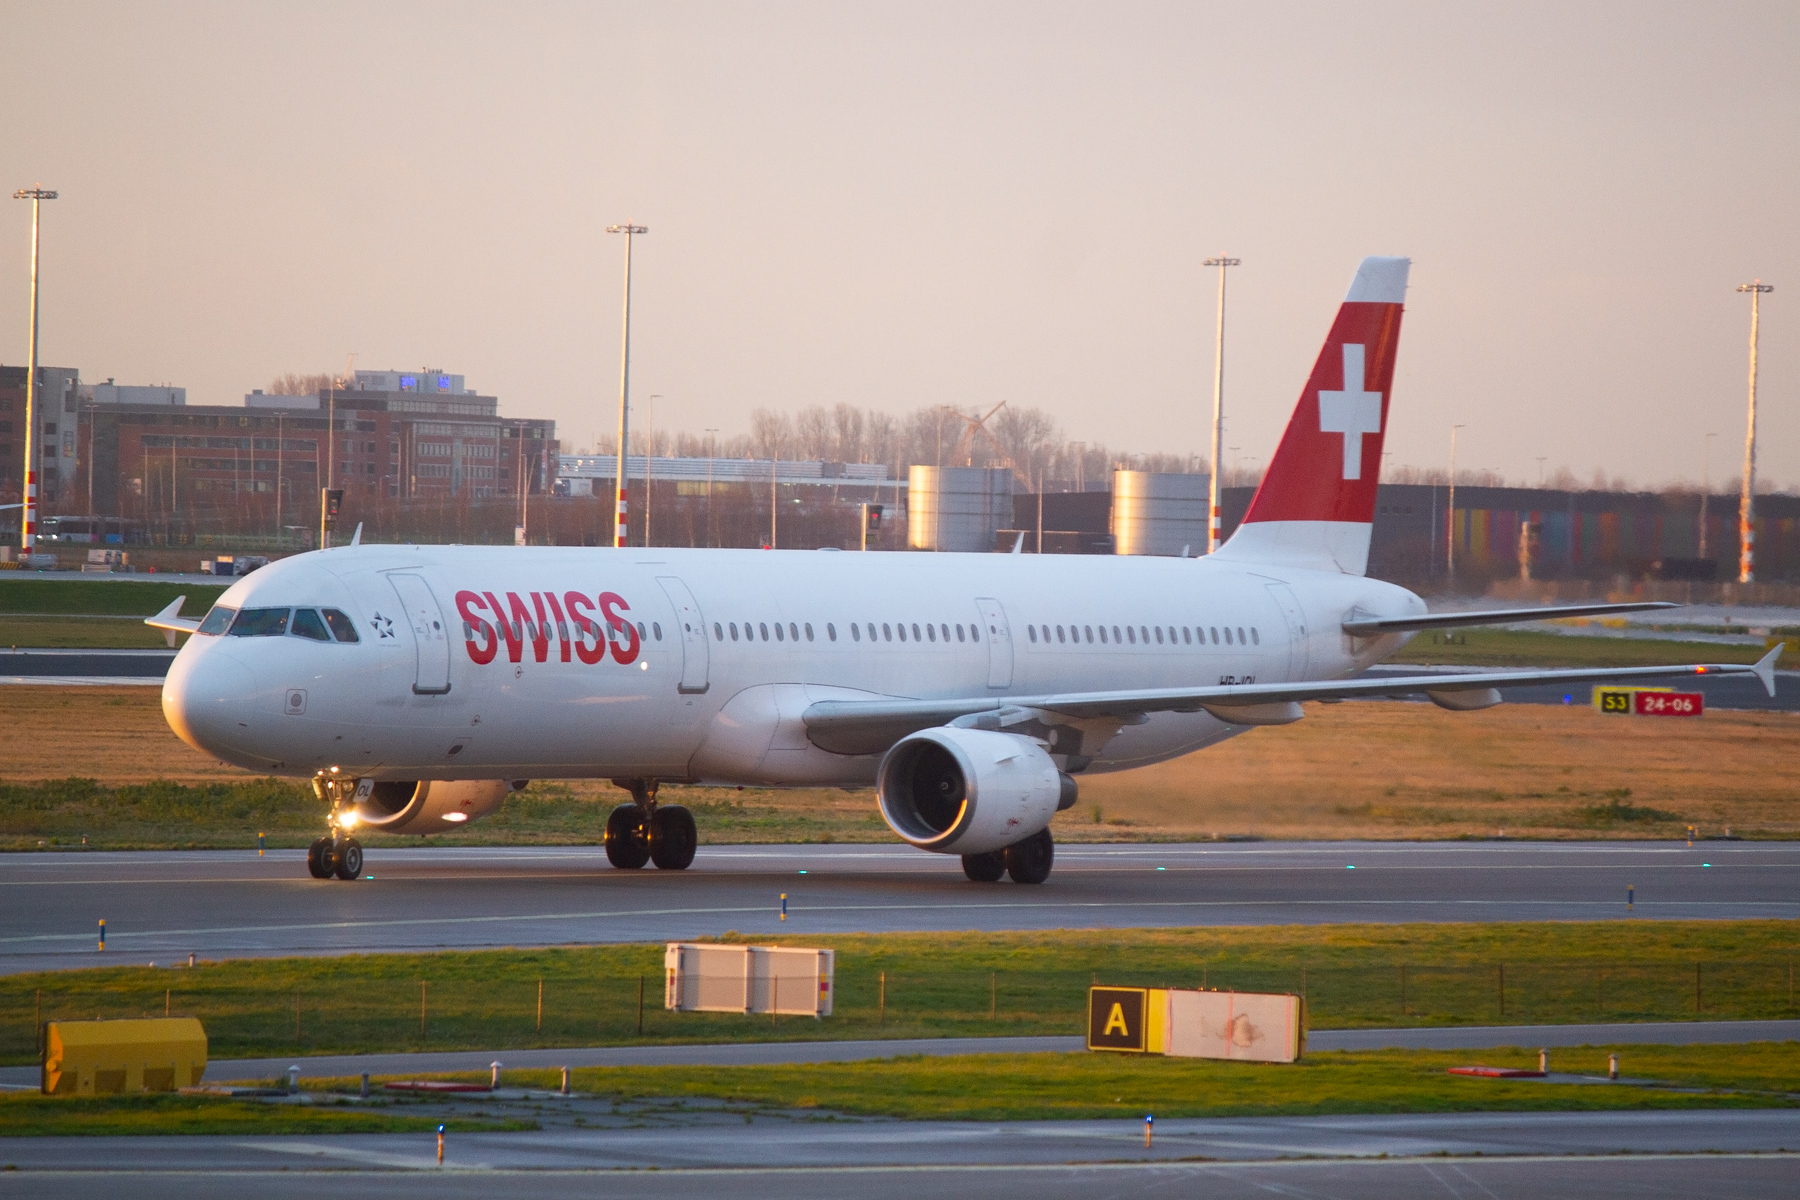 Swiss Int'l Airlines Airbus A321-100 HB-IOL at Schiphol